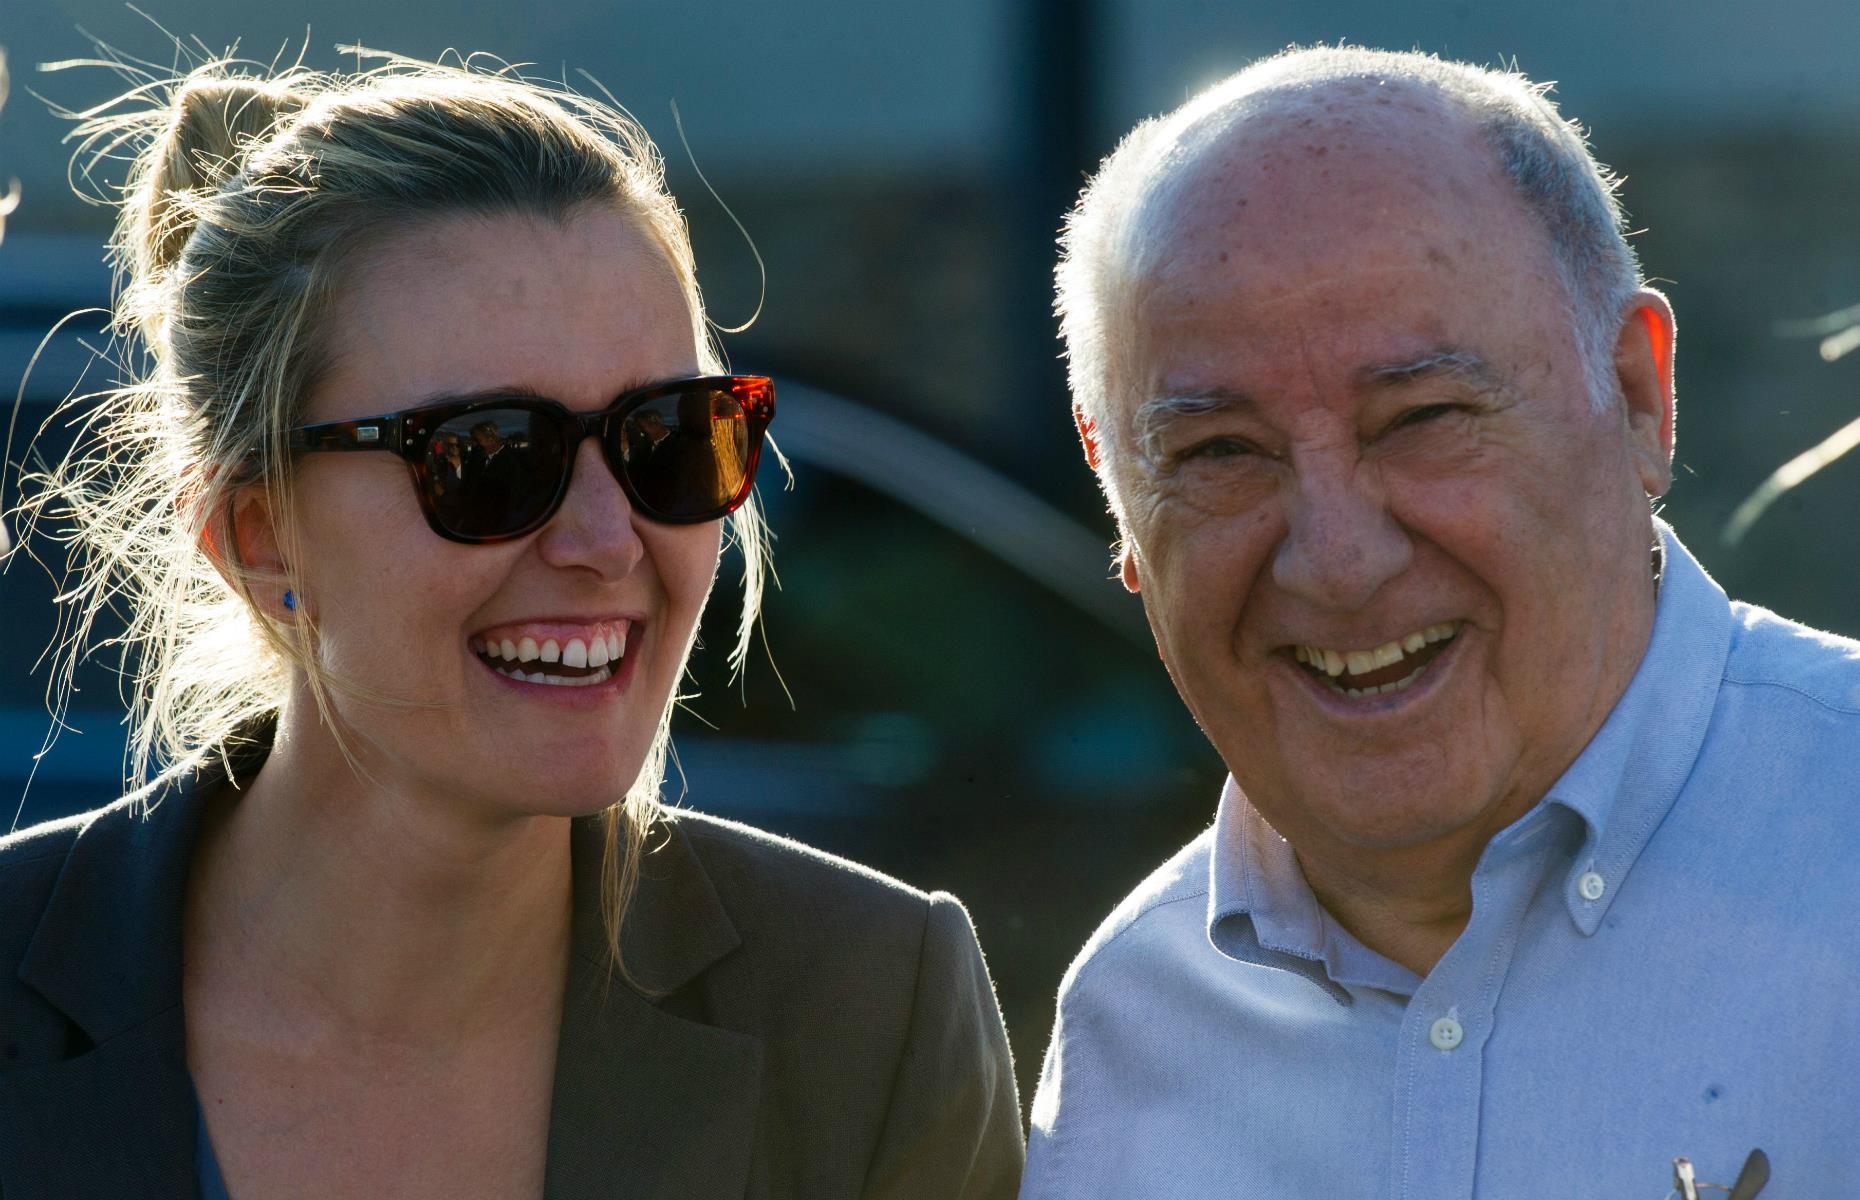 <p>Fast-fashion retailer Amancio Ortega (pictured with his youngest daughter Marta) and his late ex-wife Rosalía Mera opened the first Zara store in 1975 in A Coruña in northwest Spain, initially calling it Zorba after 'Zorba the Greek'.</p>  <p>The chain is now part of Ortega's Inditex group, which also includes the Massimo Dutti, Bershka, and Pull&Bear brands.</p>  <p>Ortega is the richest man in Spain, with a fortune of $62.9 billion. His eldest daughter Sandra has her own fortune of $6.1 billion, while Marta is now chairperson of the Inditex group.</p>